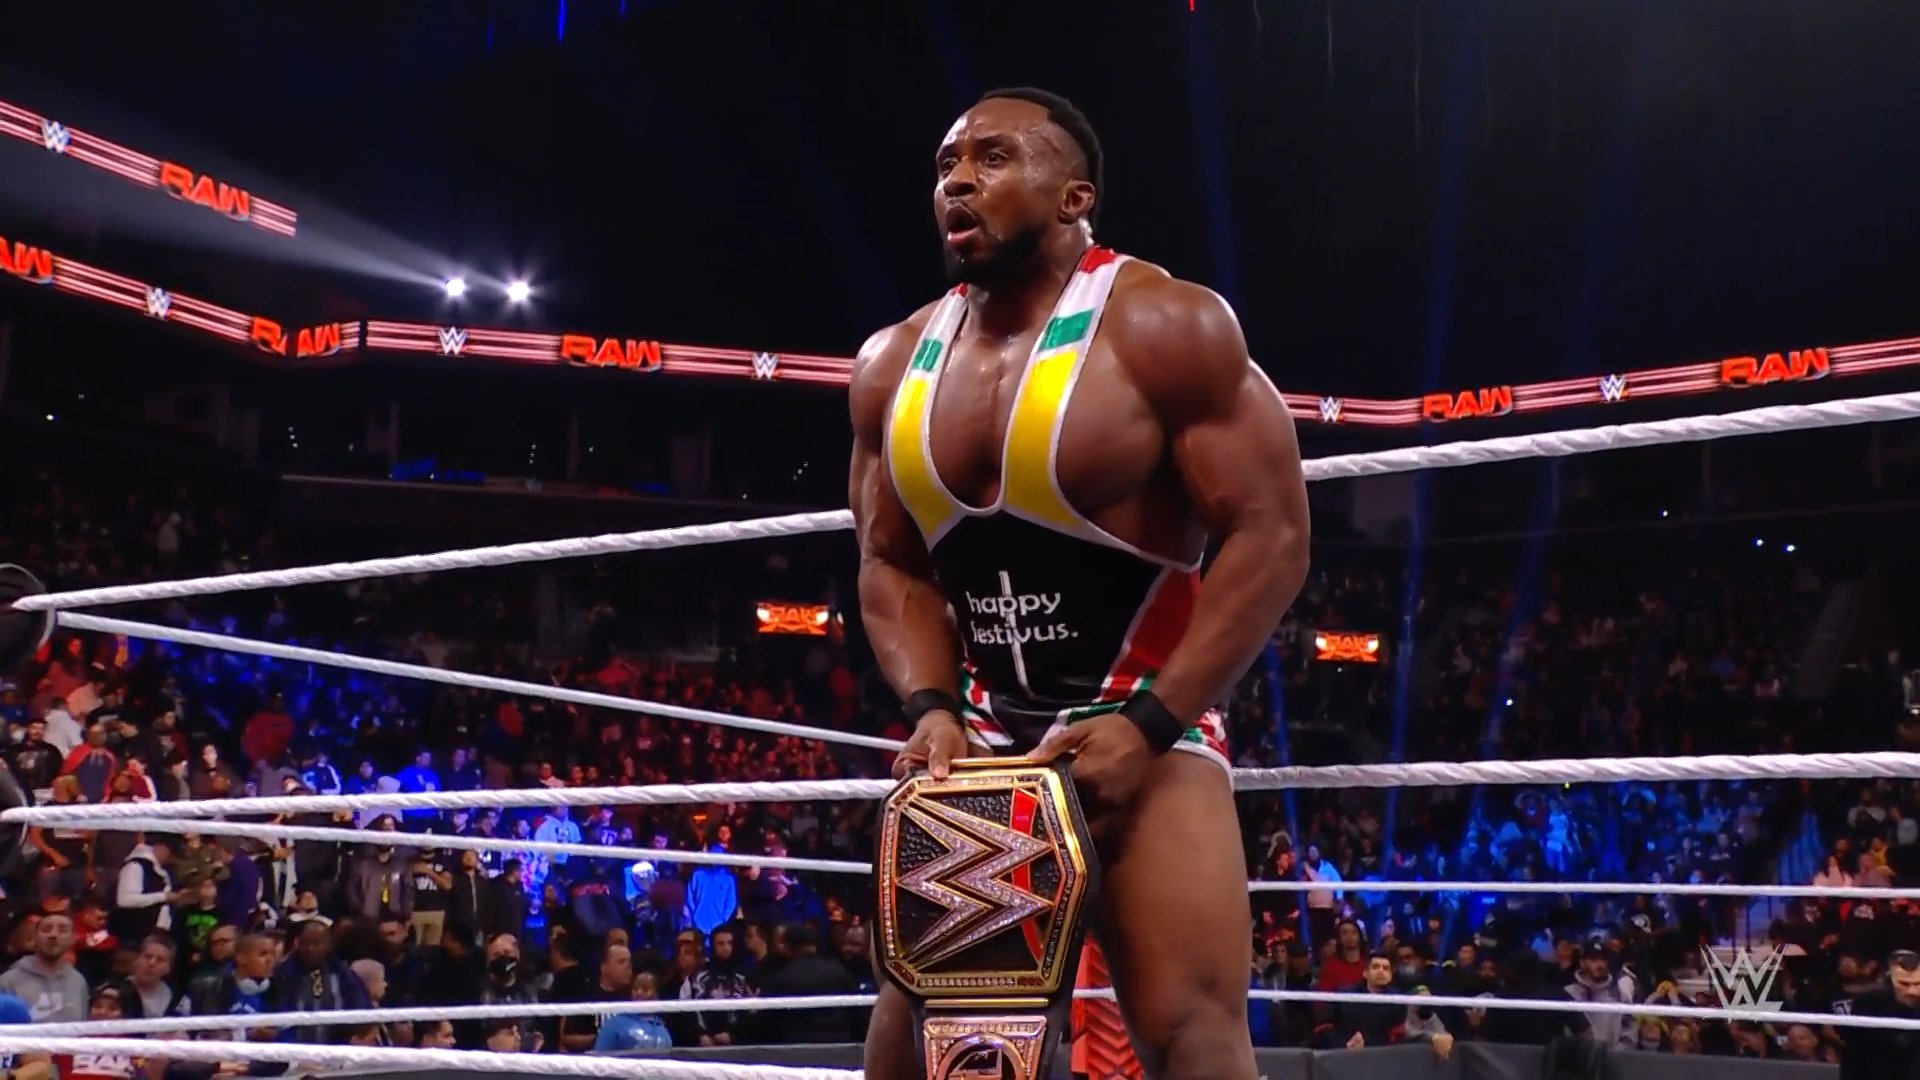 WWE Raw Results & Highlights: Big E defied odds to retain his title against Austin Theory. The Champ snapped Seth Rollins to end the night